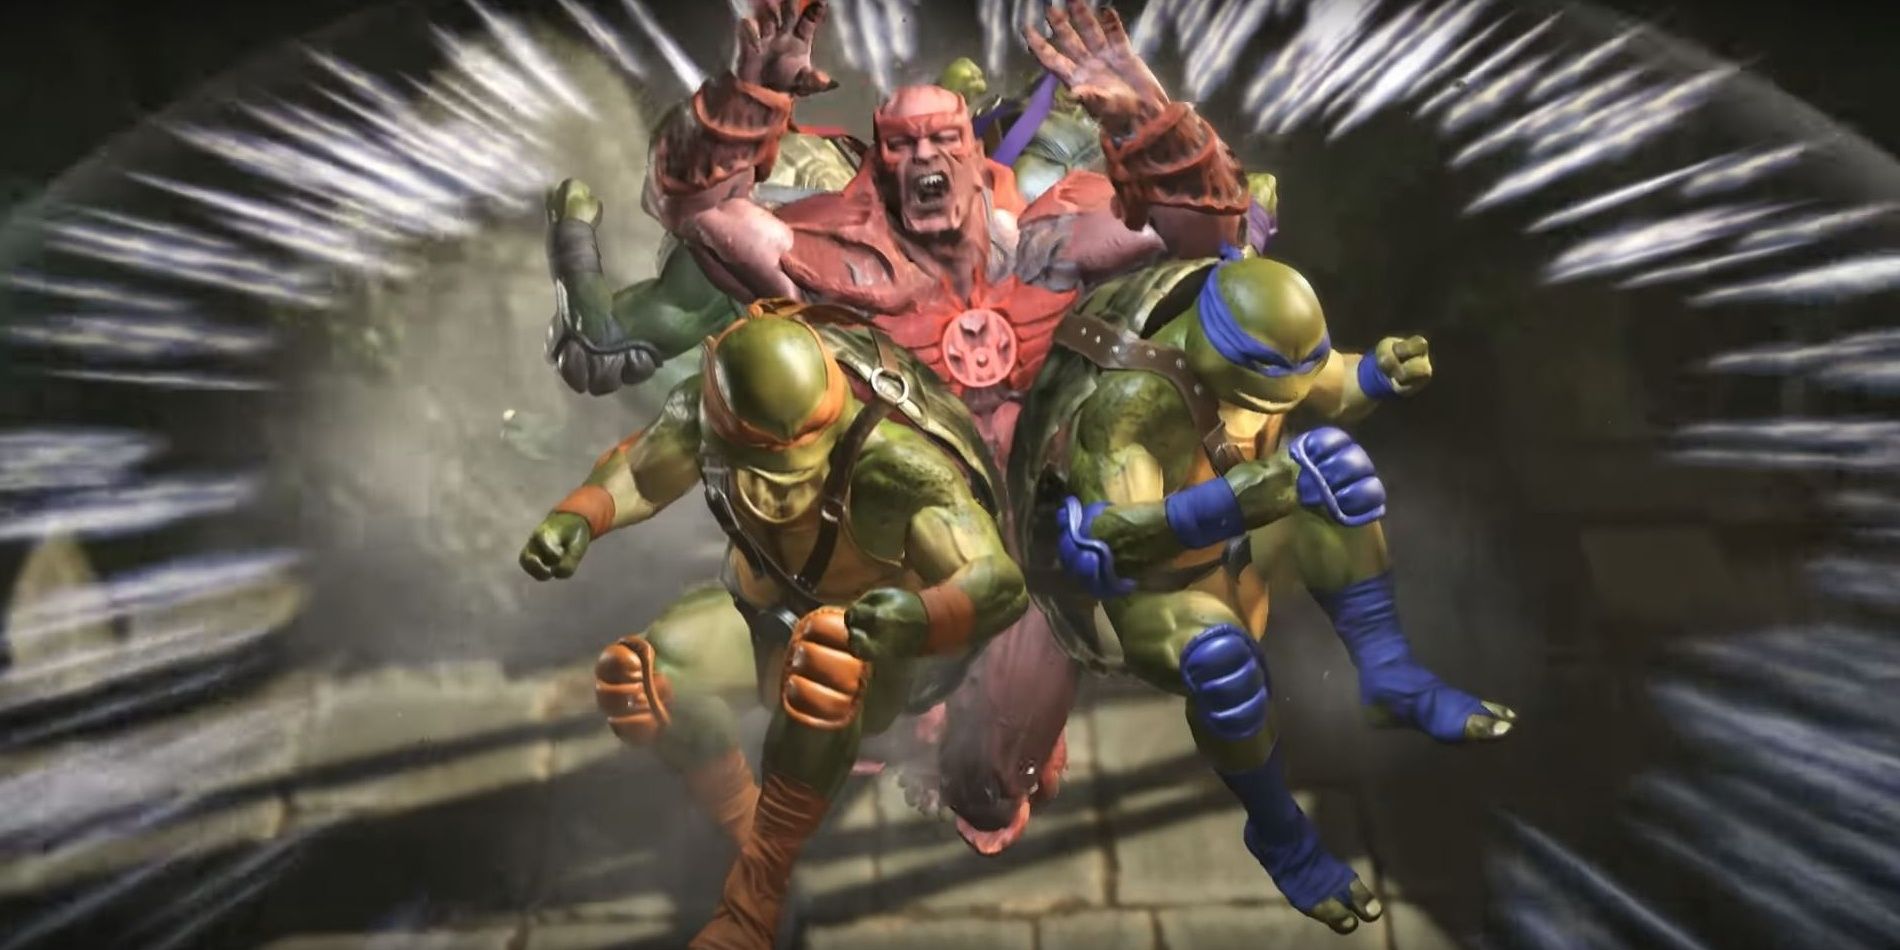 The Turtles crush their opponent in Injustice 2